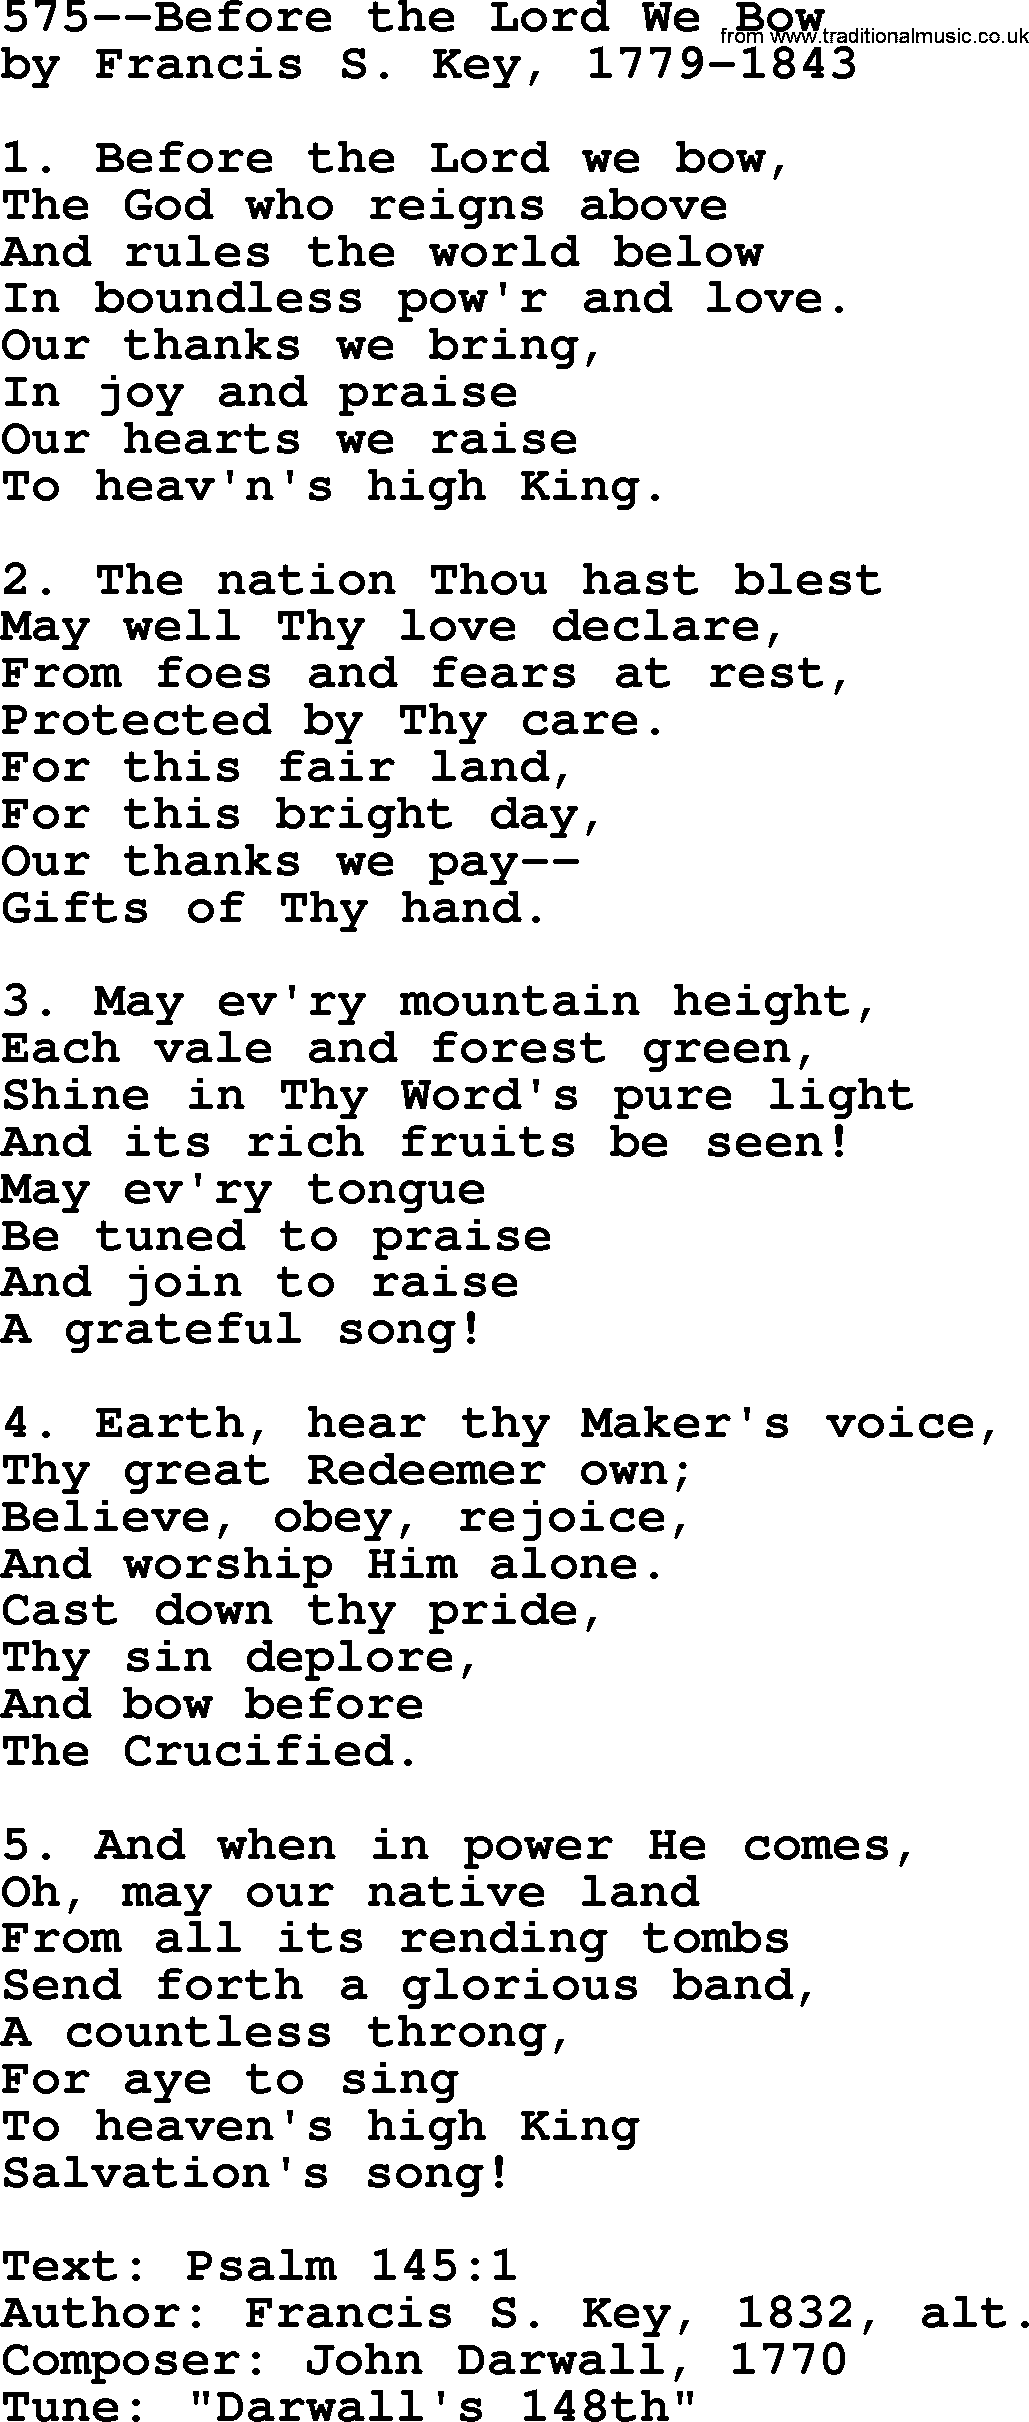 Lutheran Hymn: 575--Before the Lord We Bow.txt lyrics with PDF